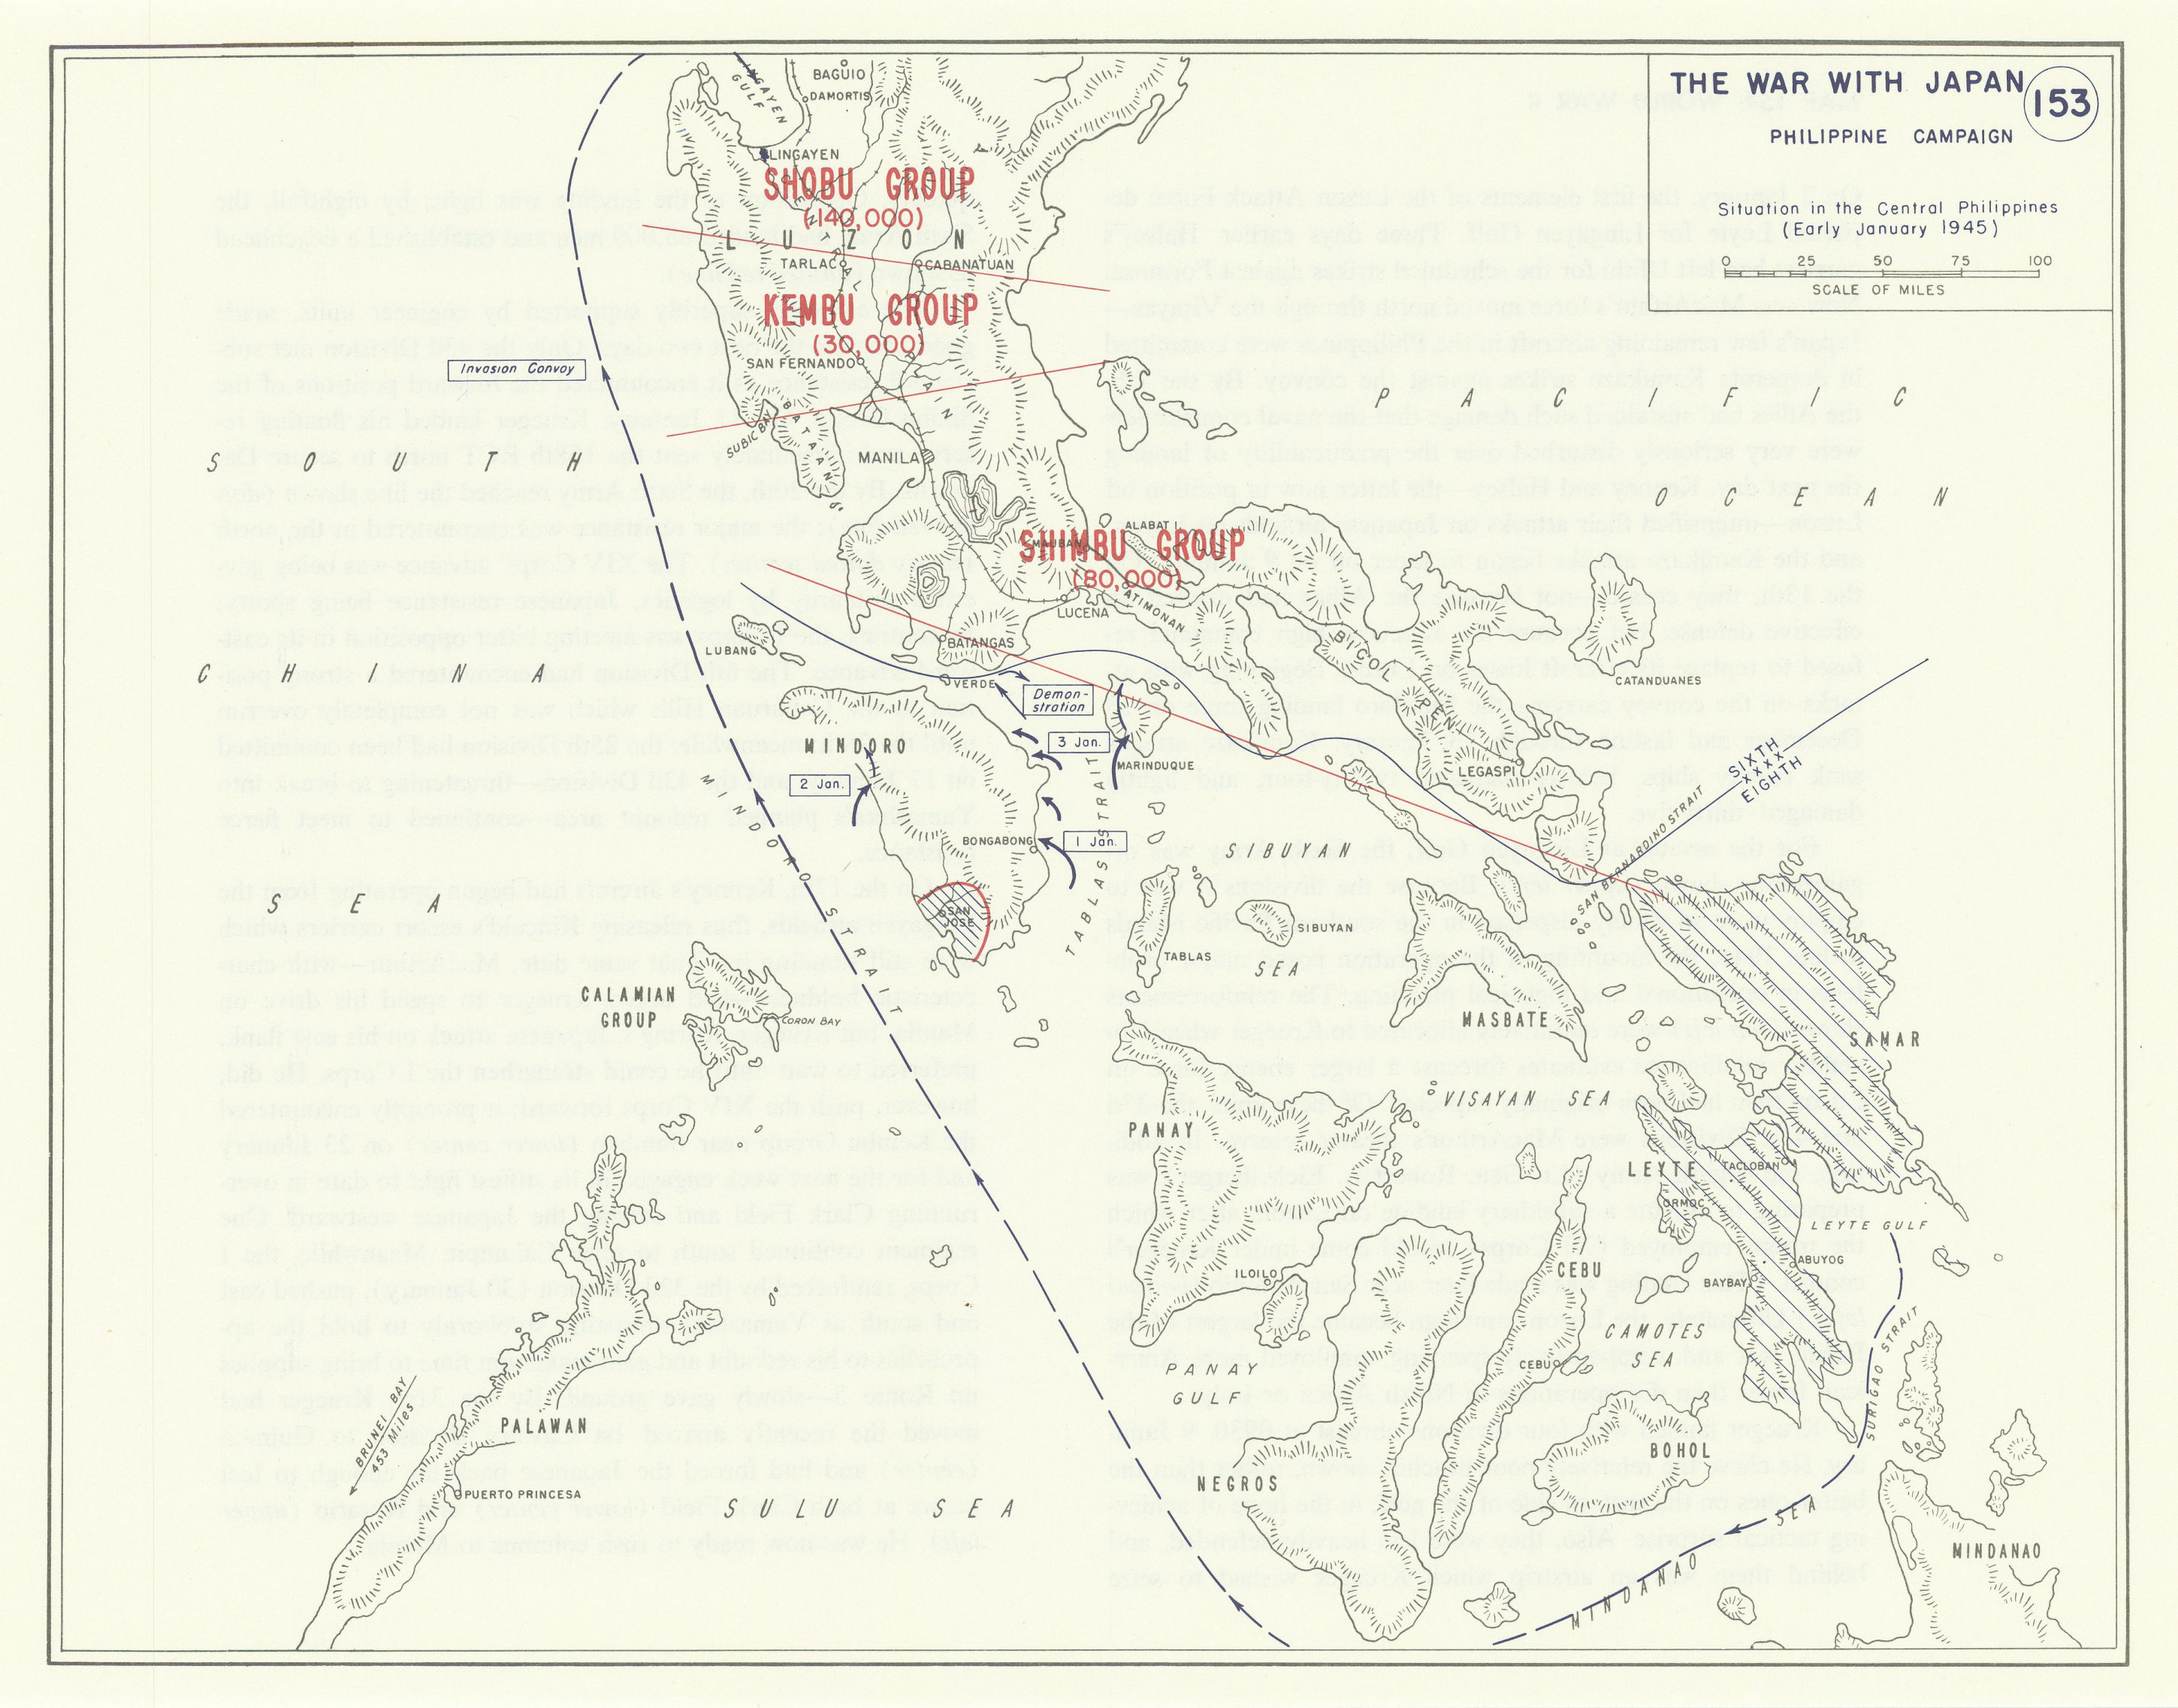 World War 2. Philippine Campaign. Early Jan 1945 Central Philippines 1959 map